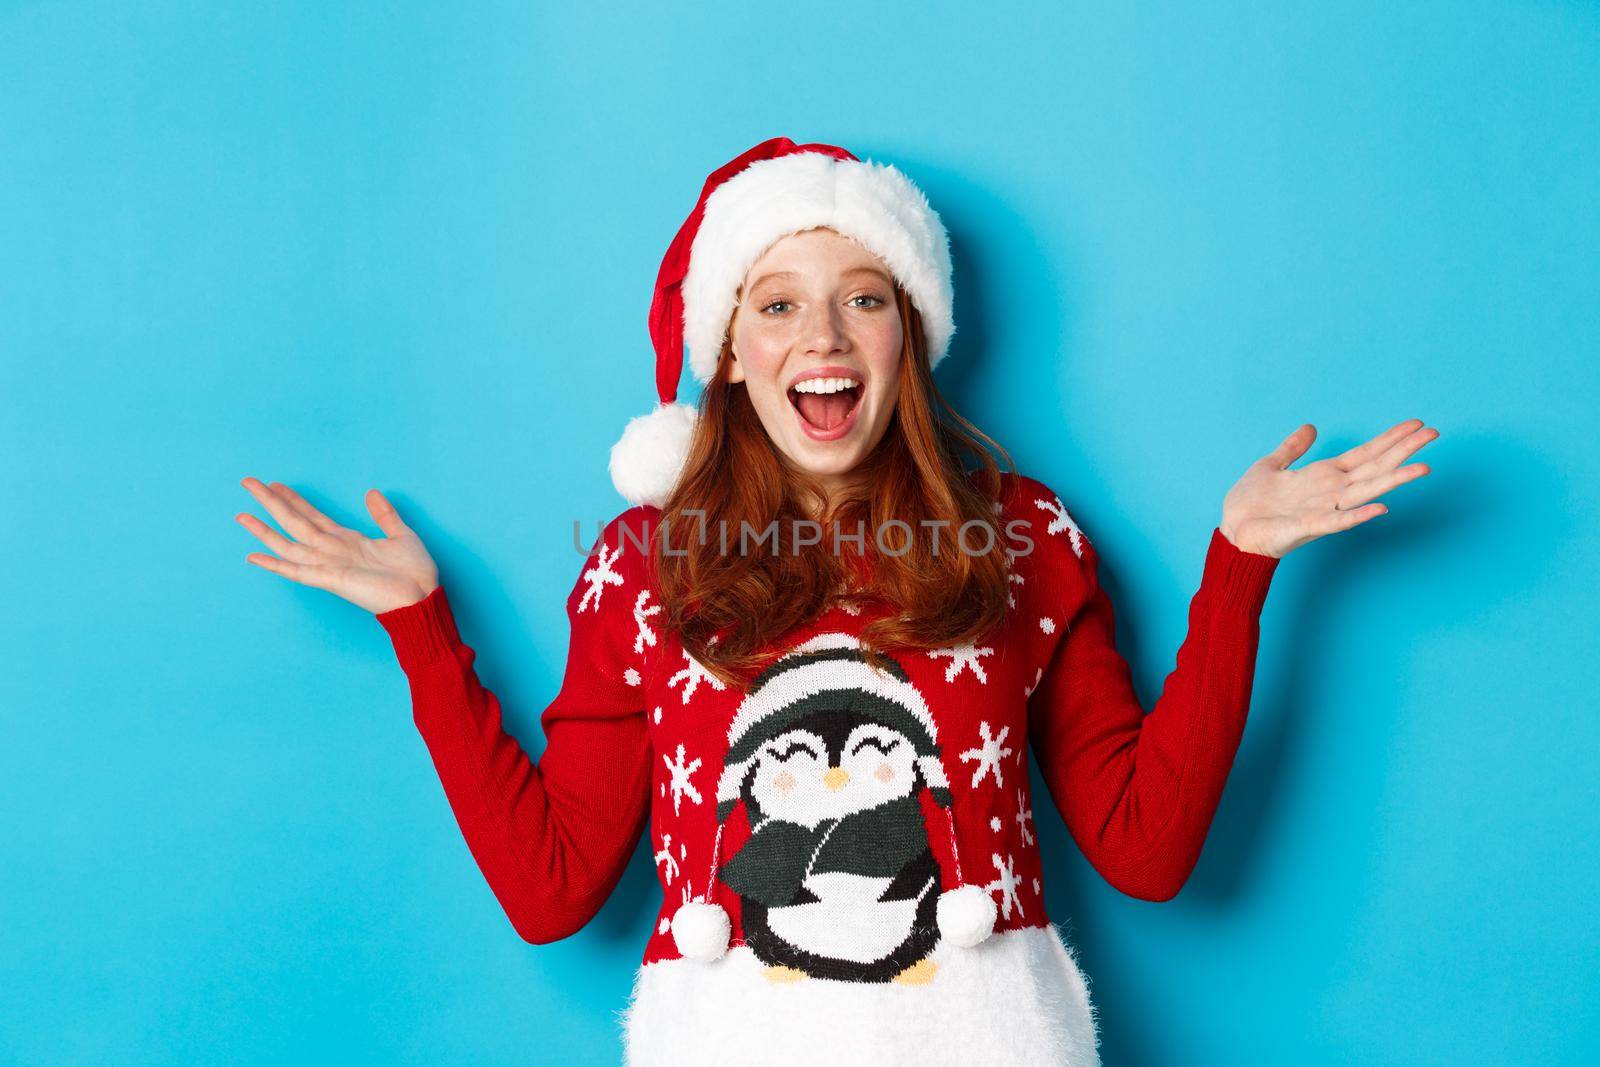 Happy holidays concept. Cheerful redhead girl in xmas sweater and santa hat, raising hands up and wishing merry Christmas, standing against blue background.